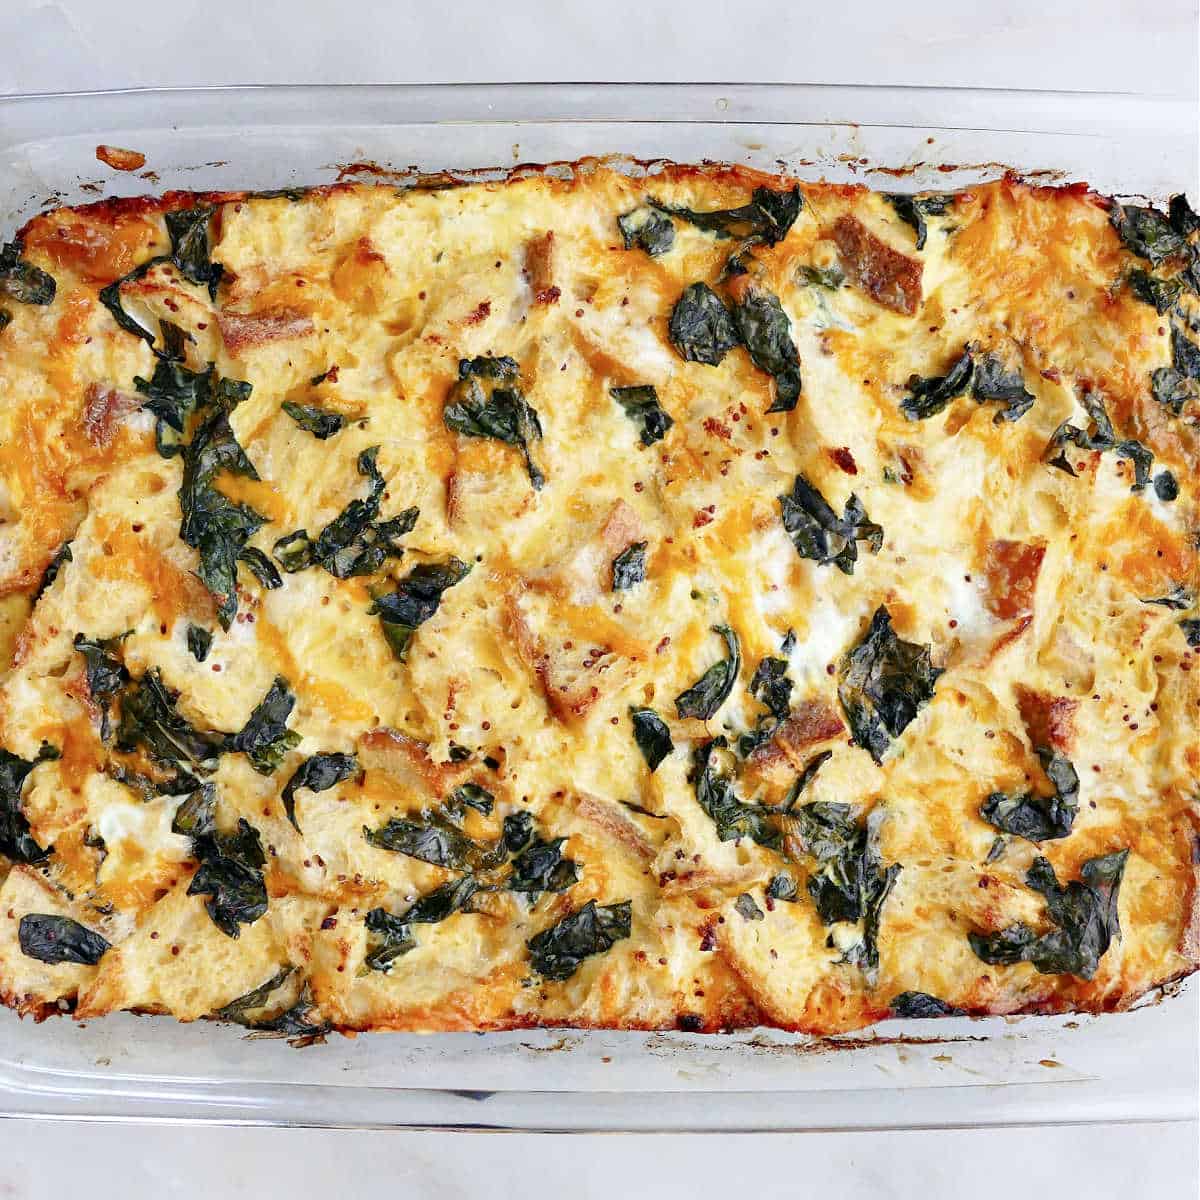 sourdough breakfast casserole with kale after coming out of the oven